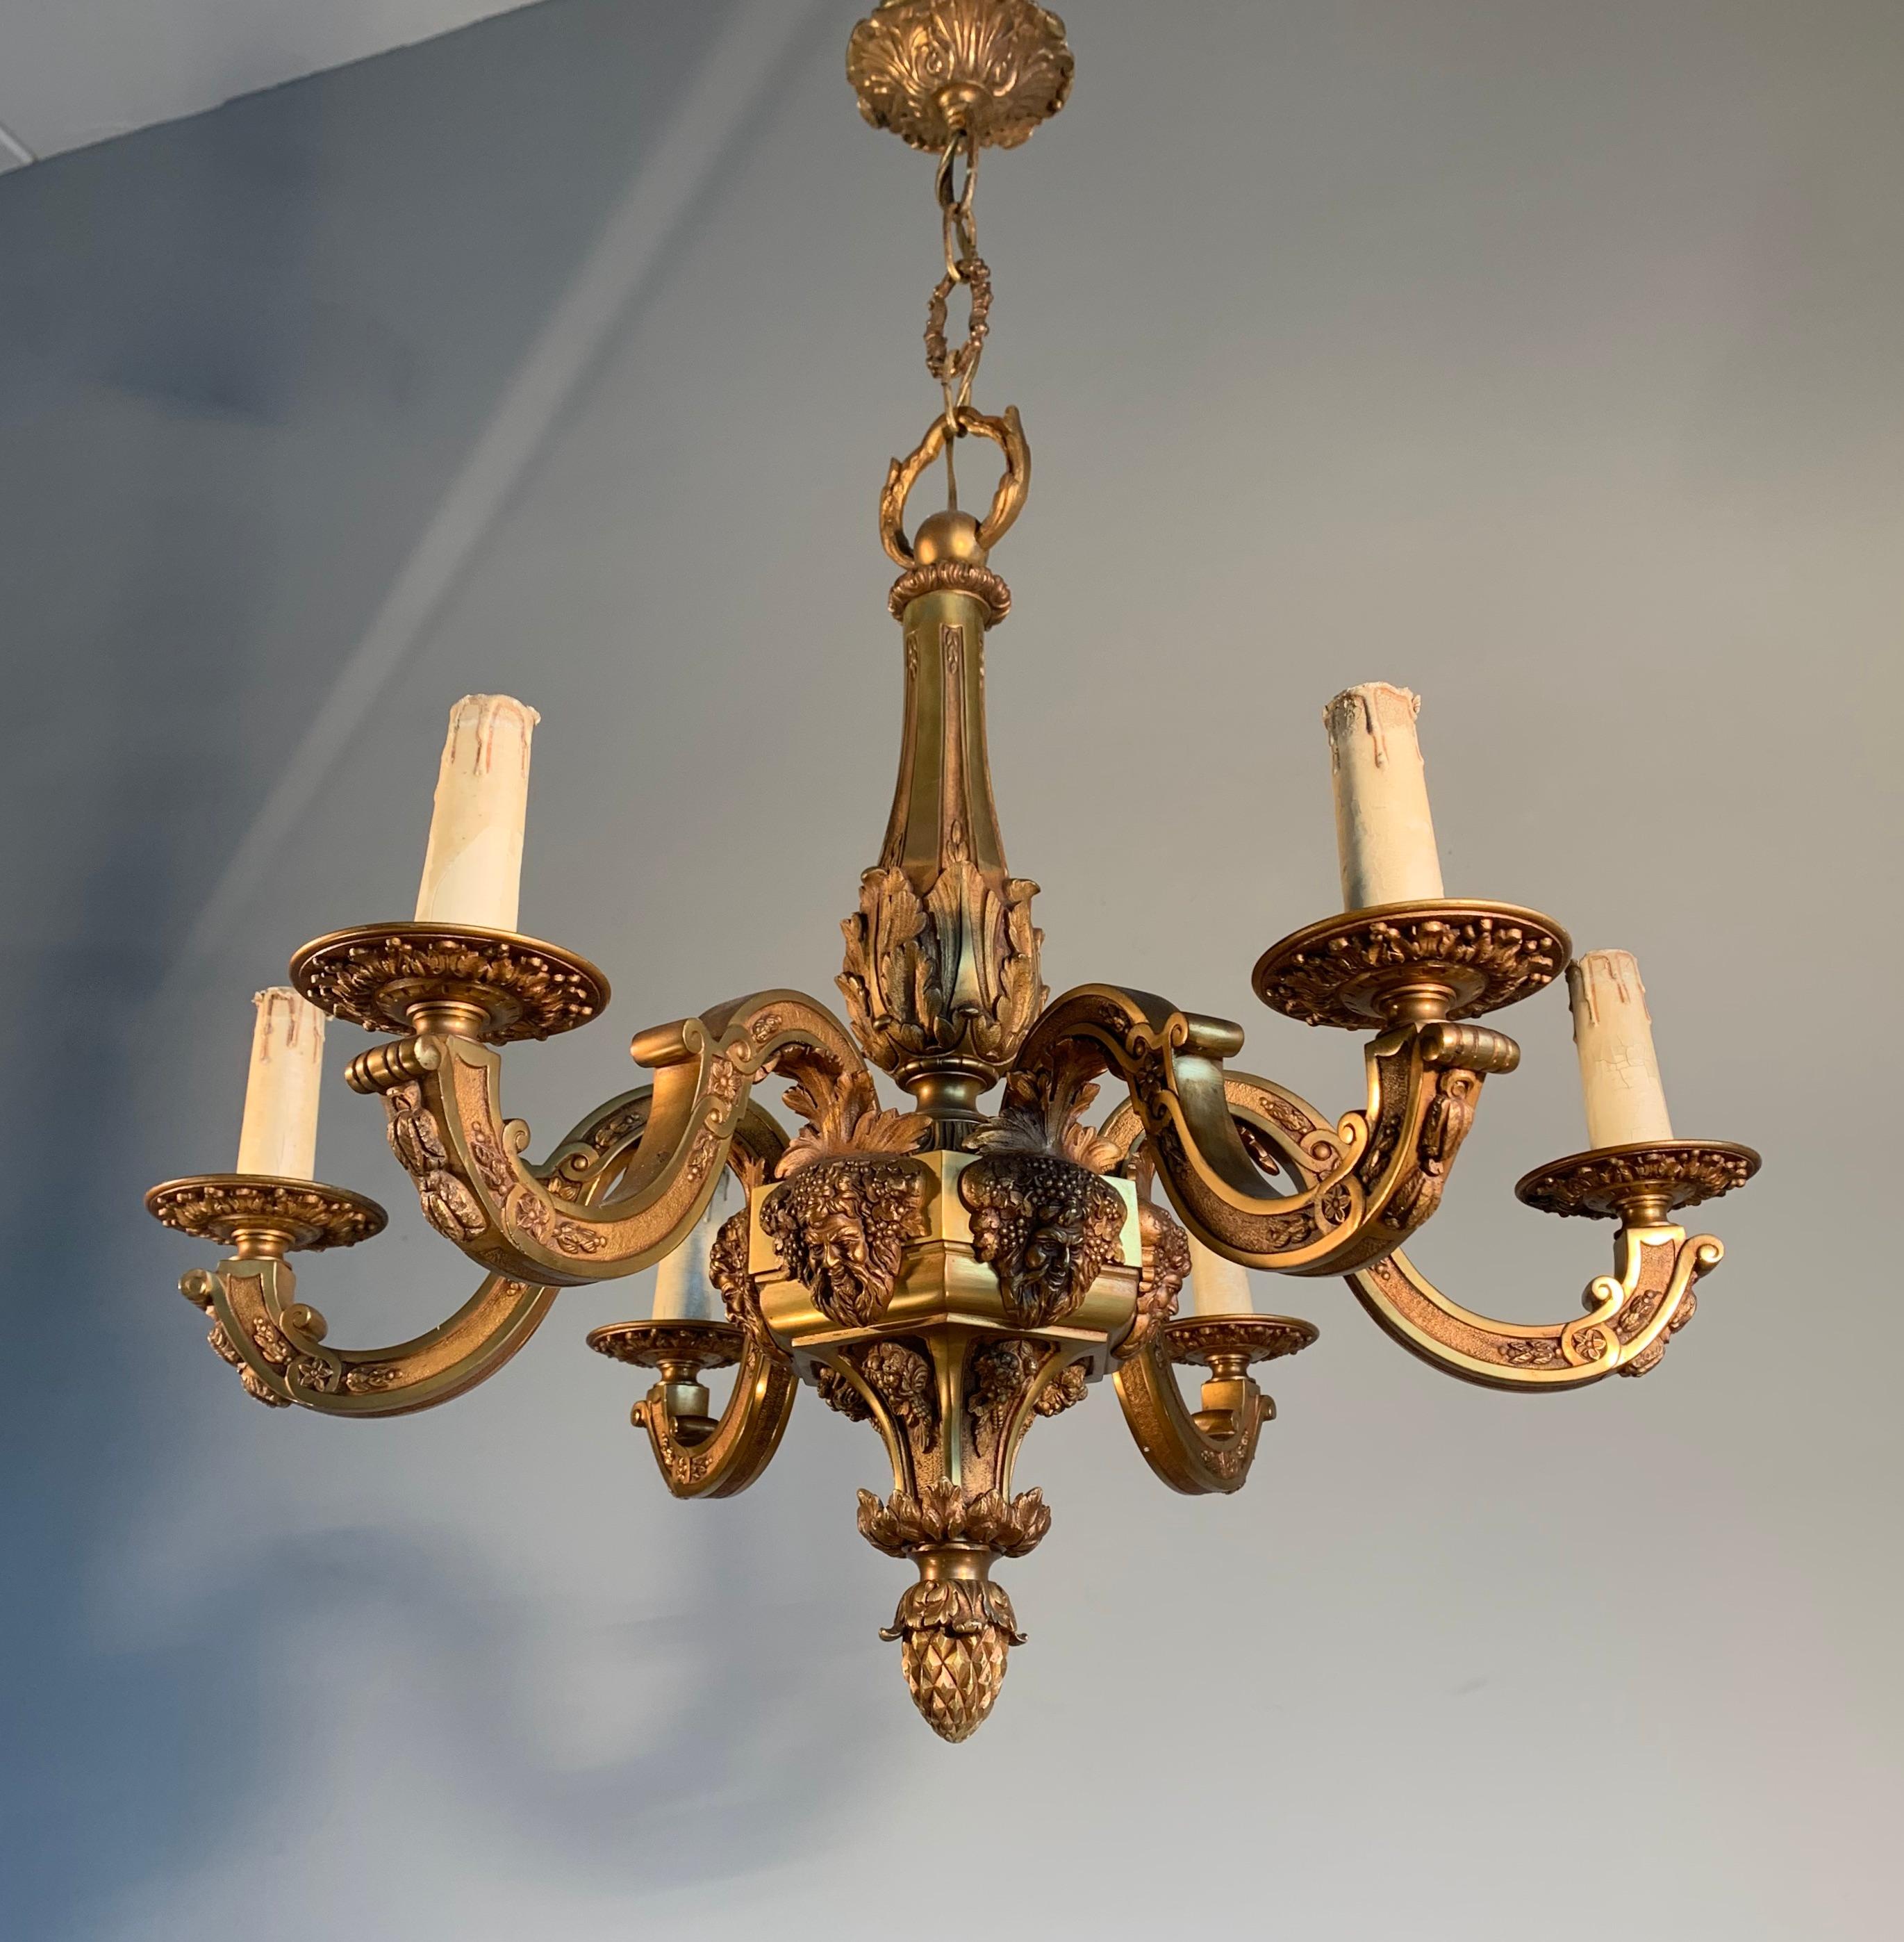 Hand-Crafted Antique Mazarin Six Light Gilt Bronze Chandelier with Bacchus God of Wine Masks For Sale